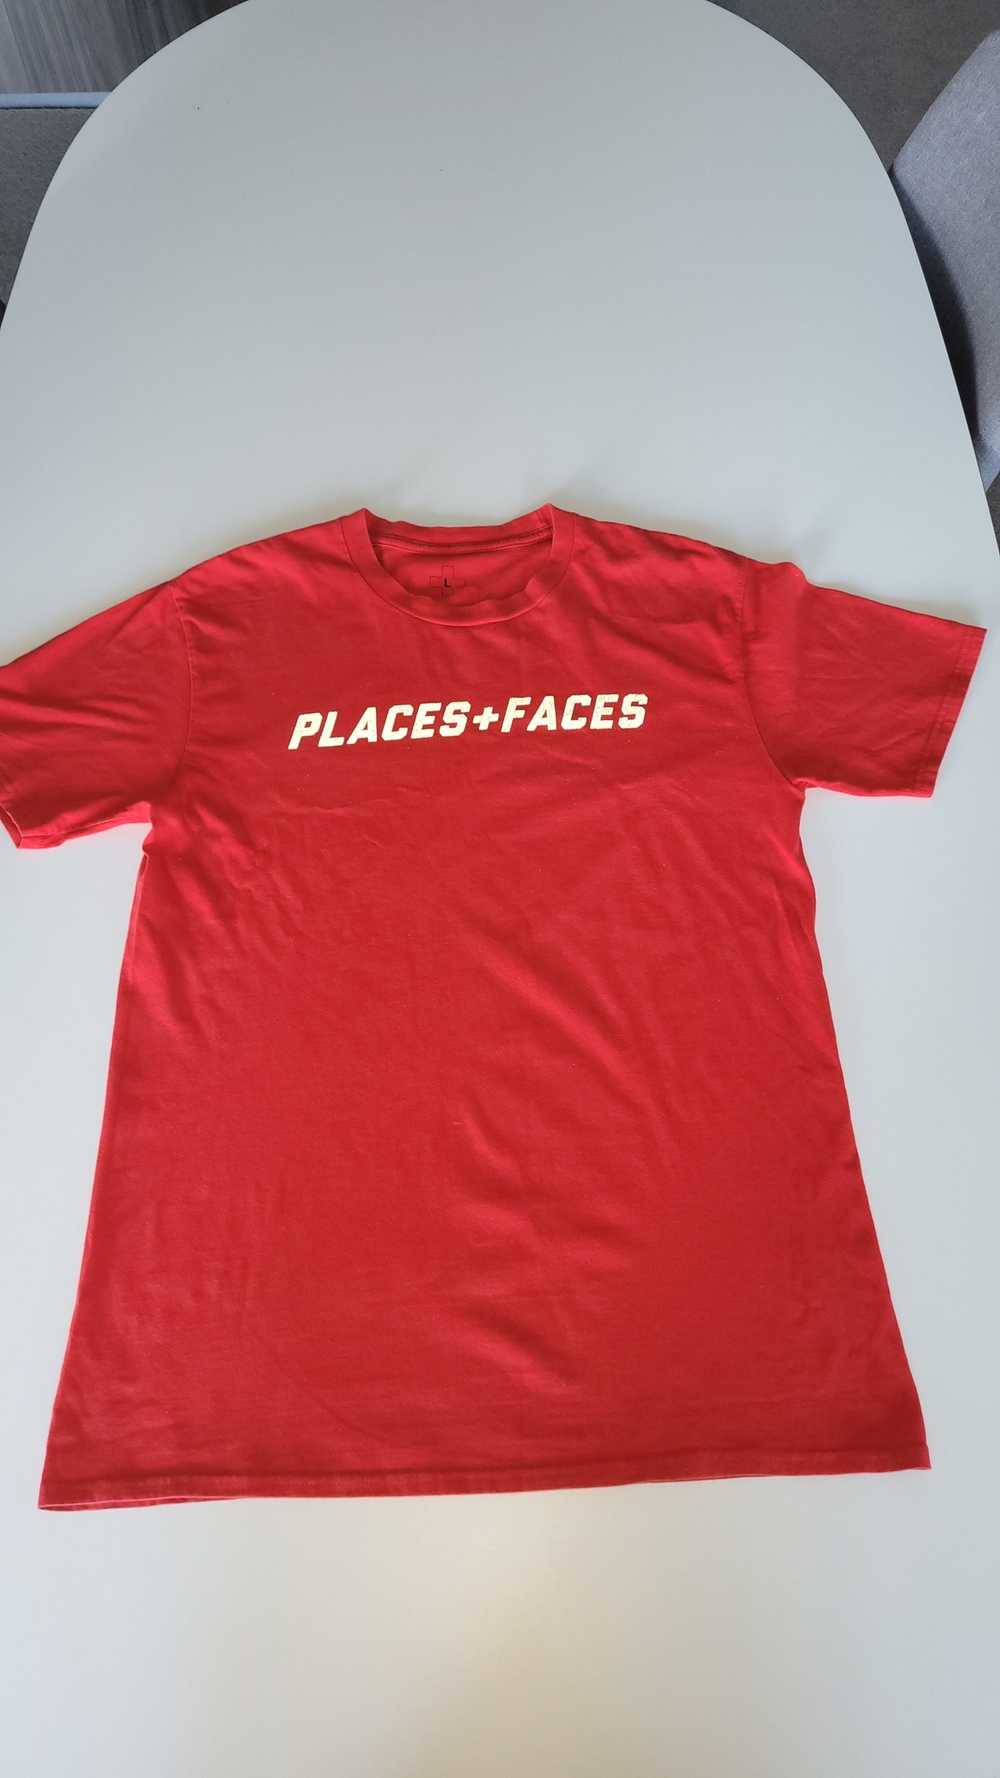 Places + Faces Reflective 3M logo tee - image 2